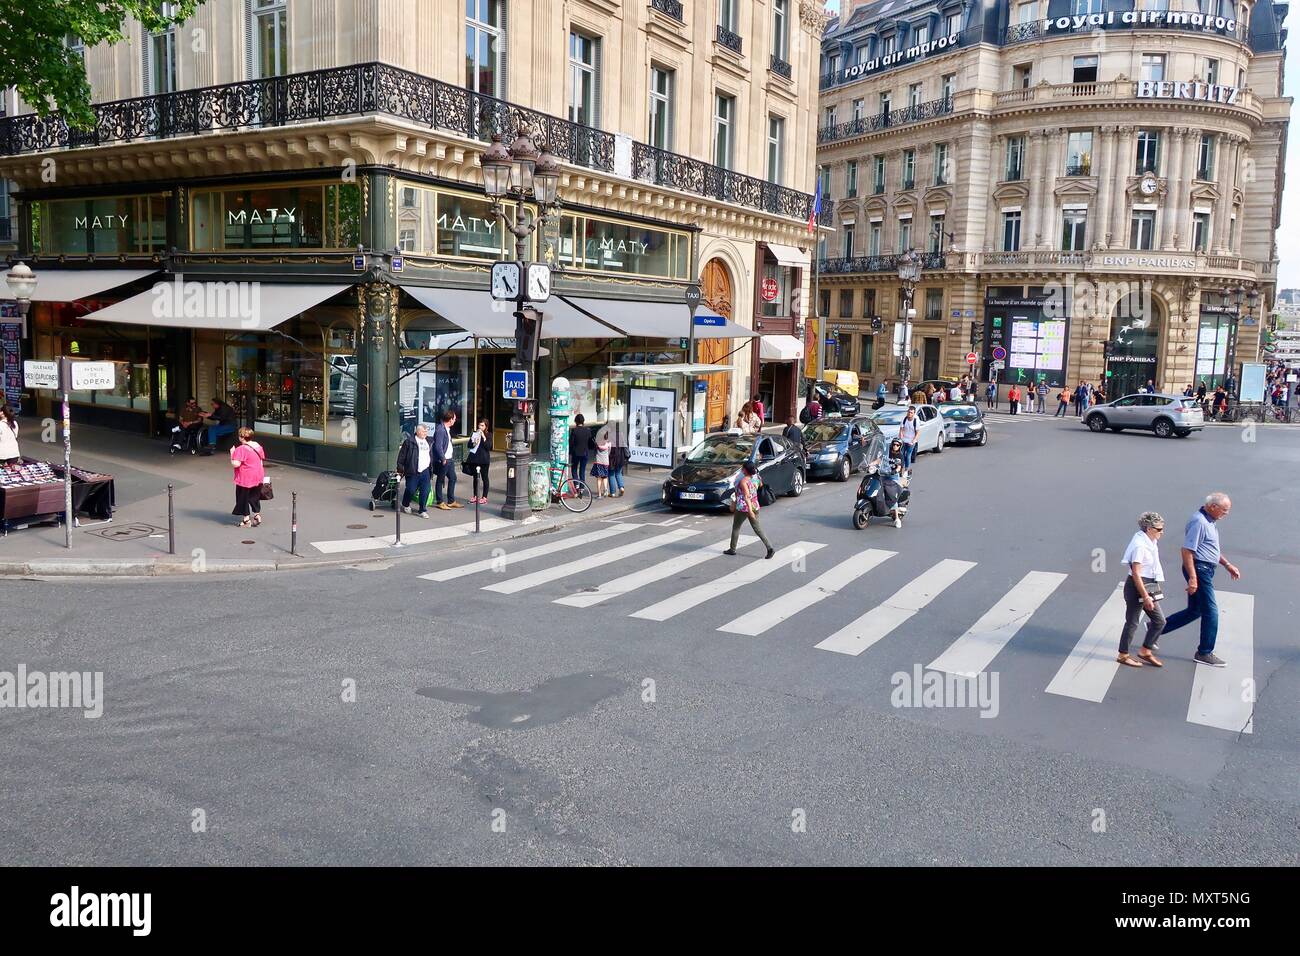 Paris, France. Hot bright sunny spring day, May 2018. Pedestrian crossing in the L’Opera district. Stock Photo